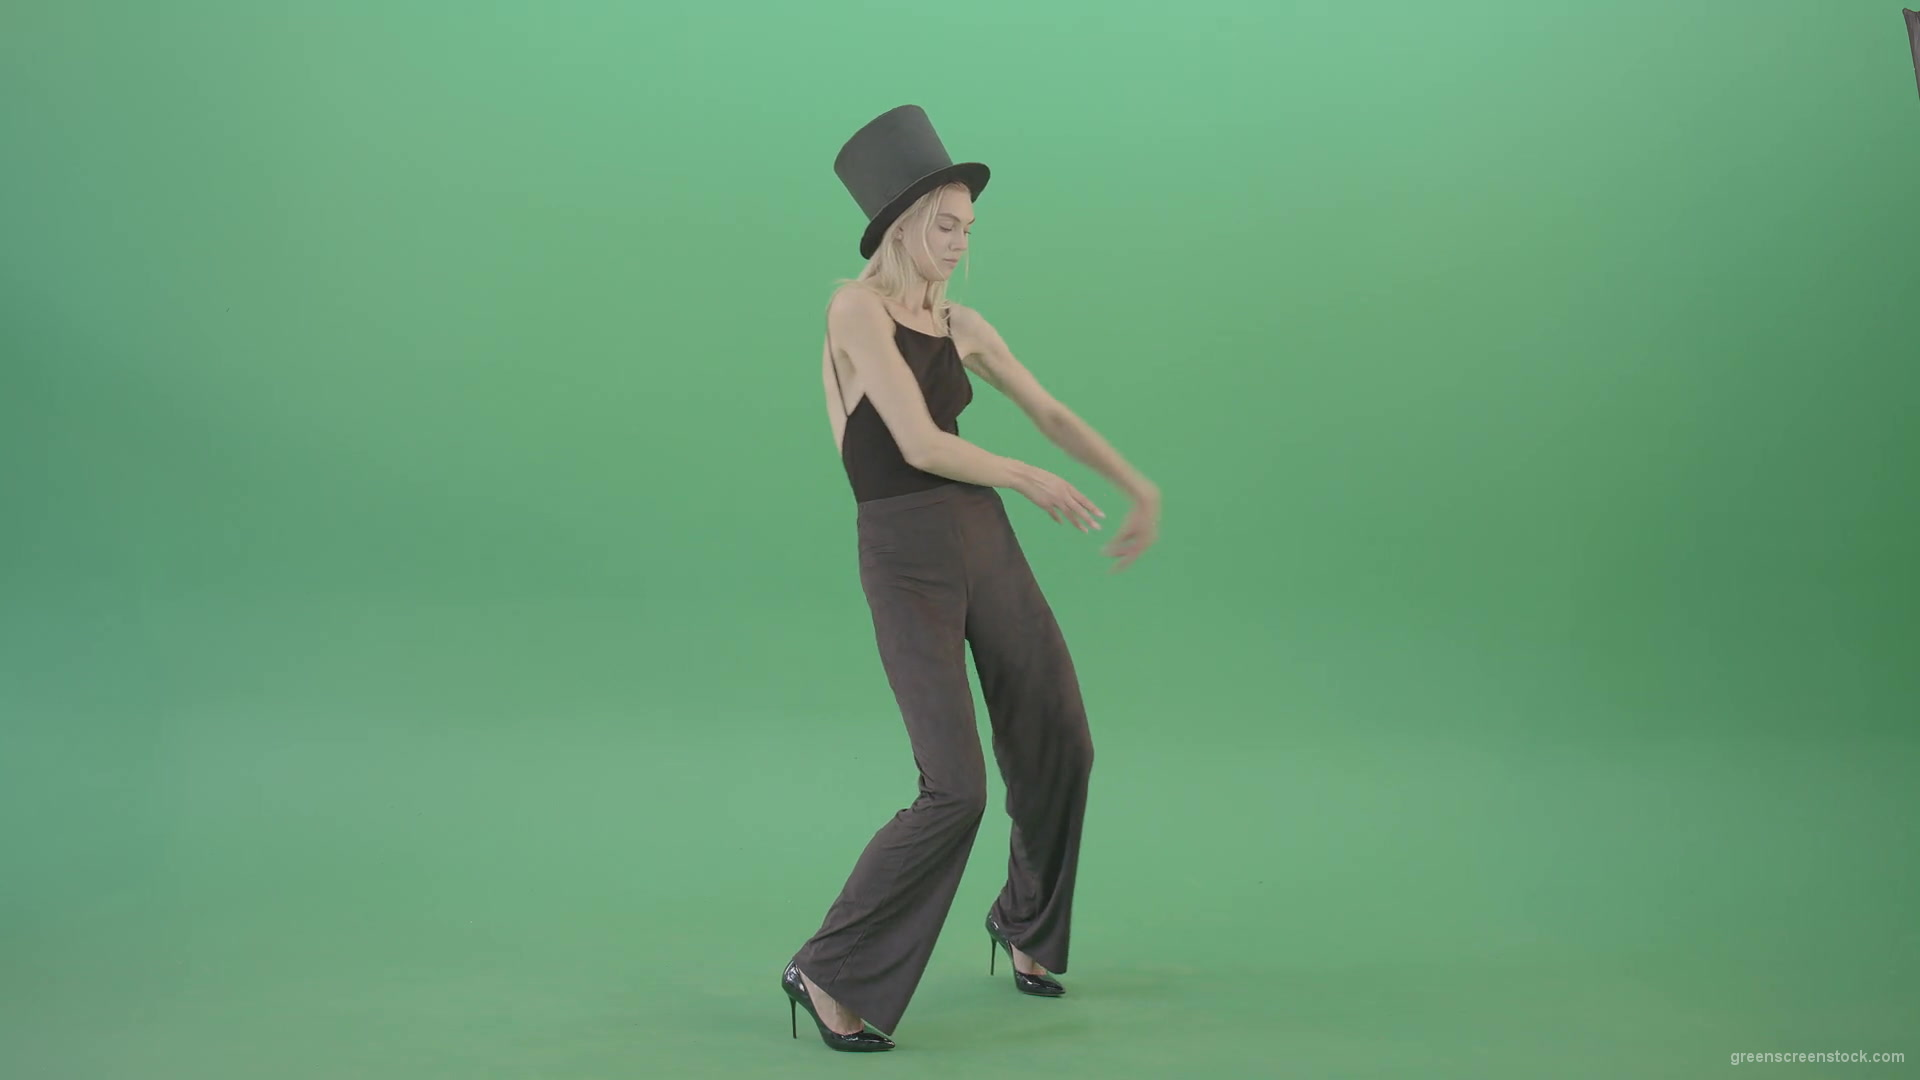 Magic-elegant-dancing-girl-slowly-moving-on-green-background-4K-Video-Footage-1920_004 Green Screen Stock